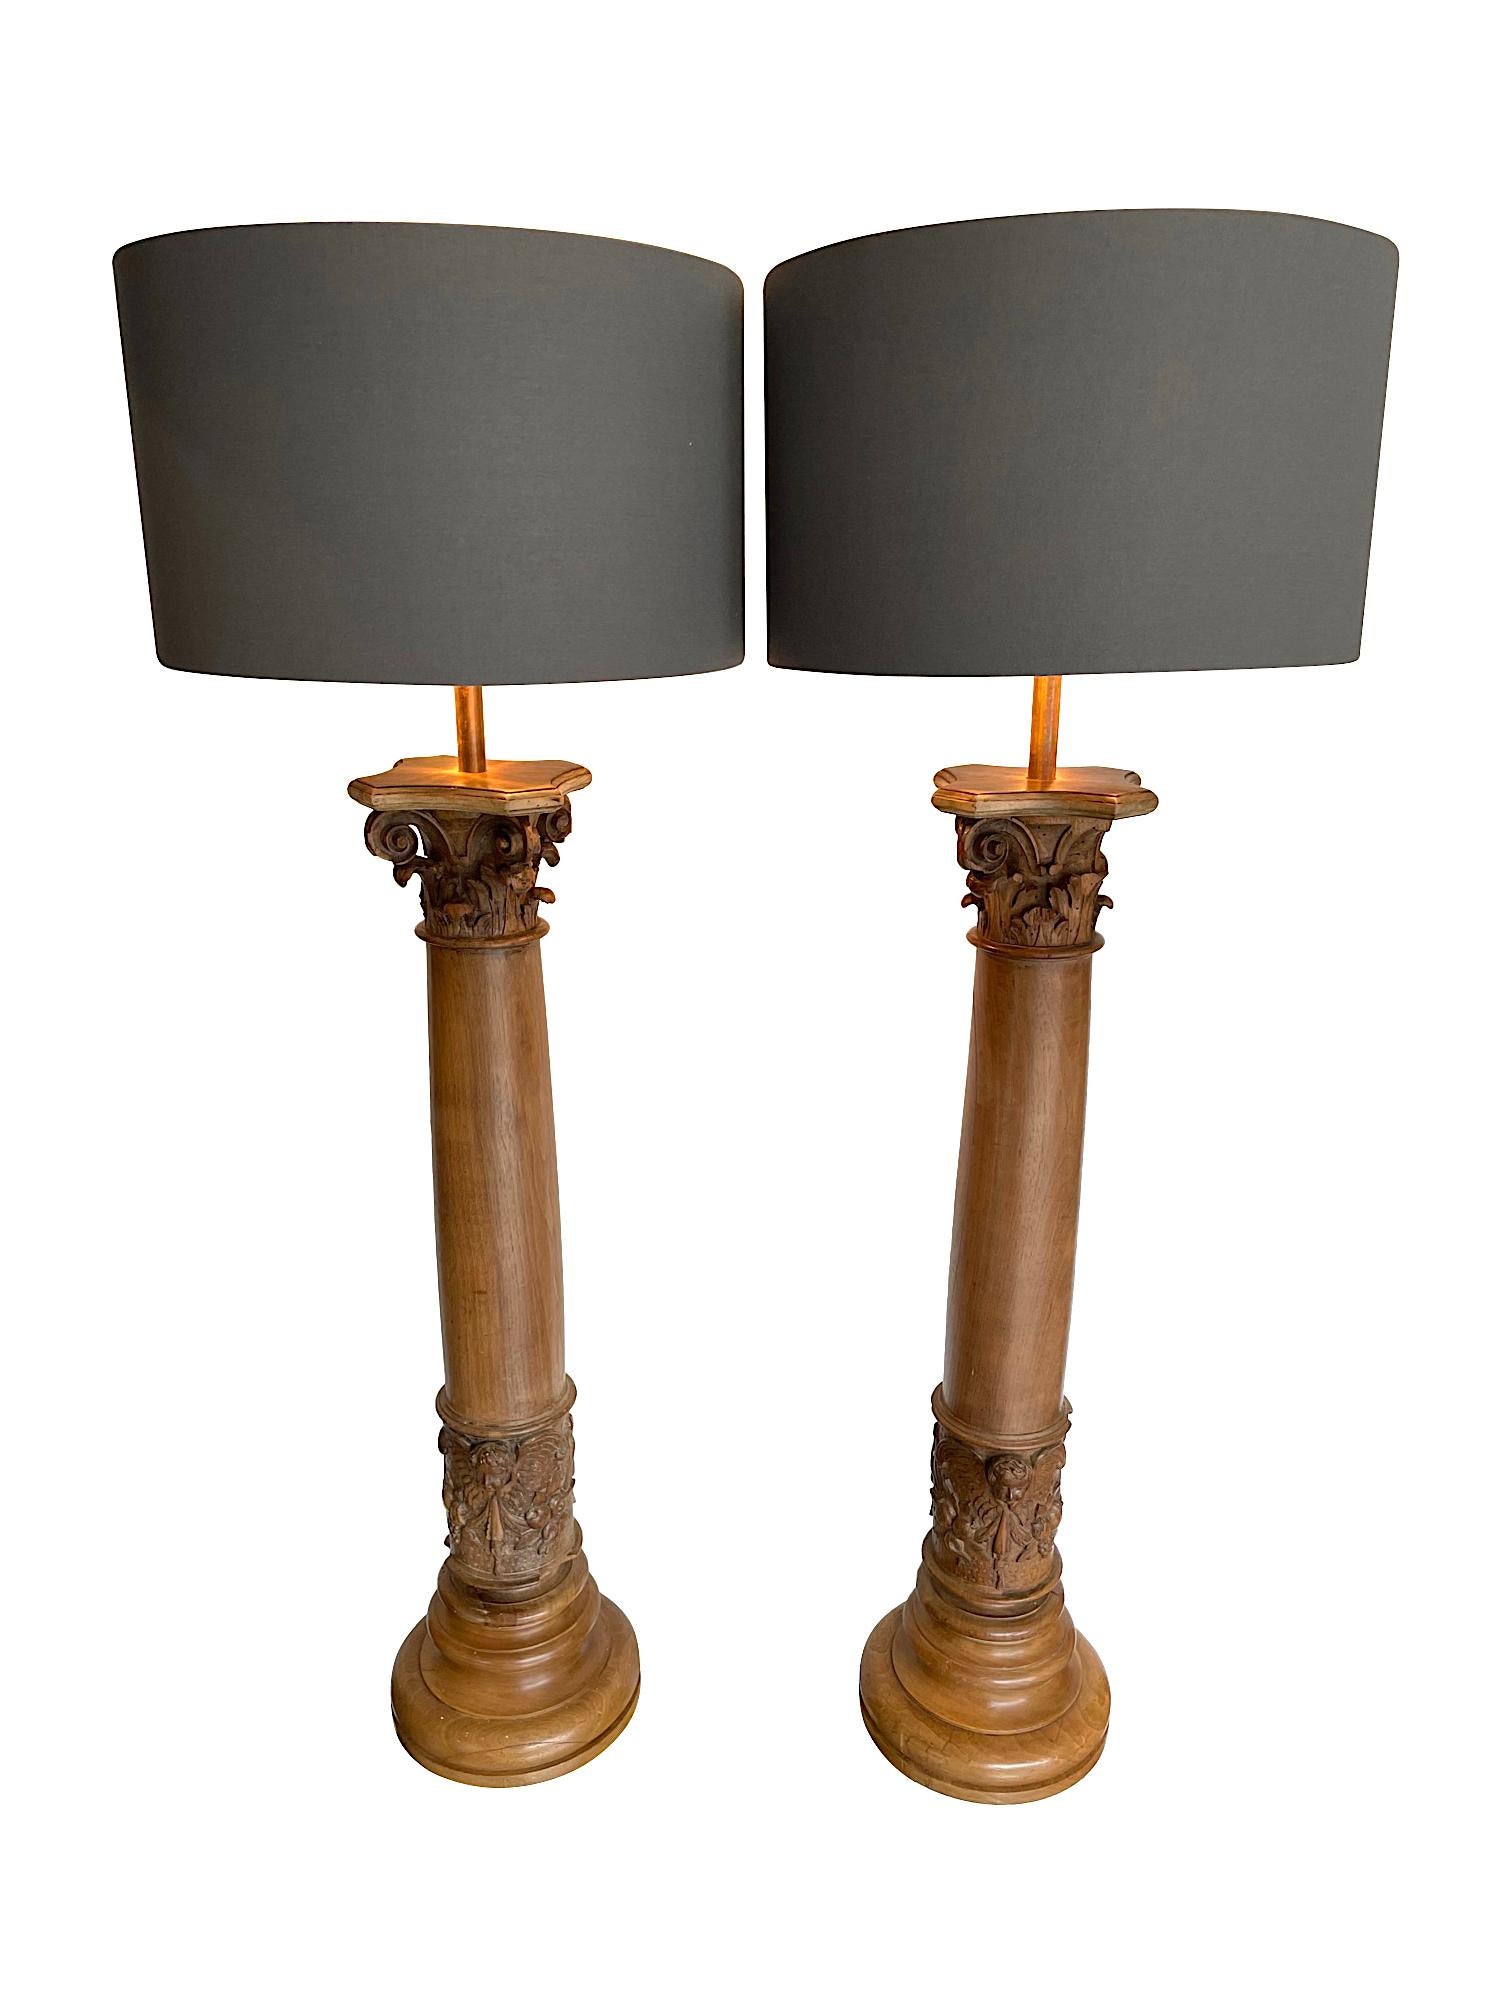 English Large Pair of 19th Century Oak Corinthian Column Lamps with Carved Cherubs